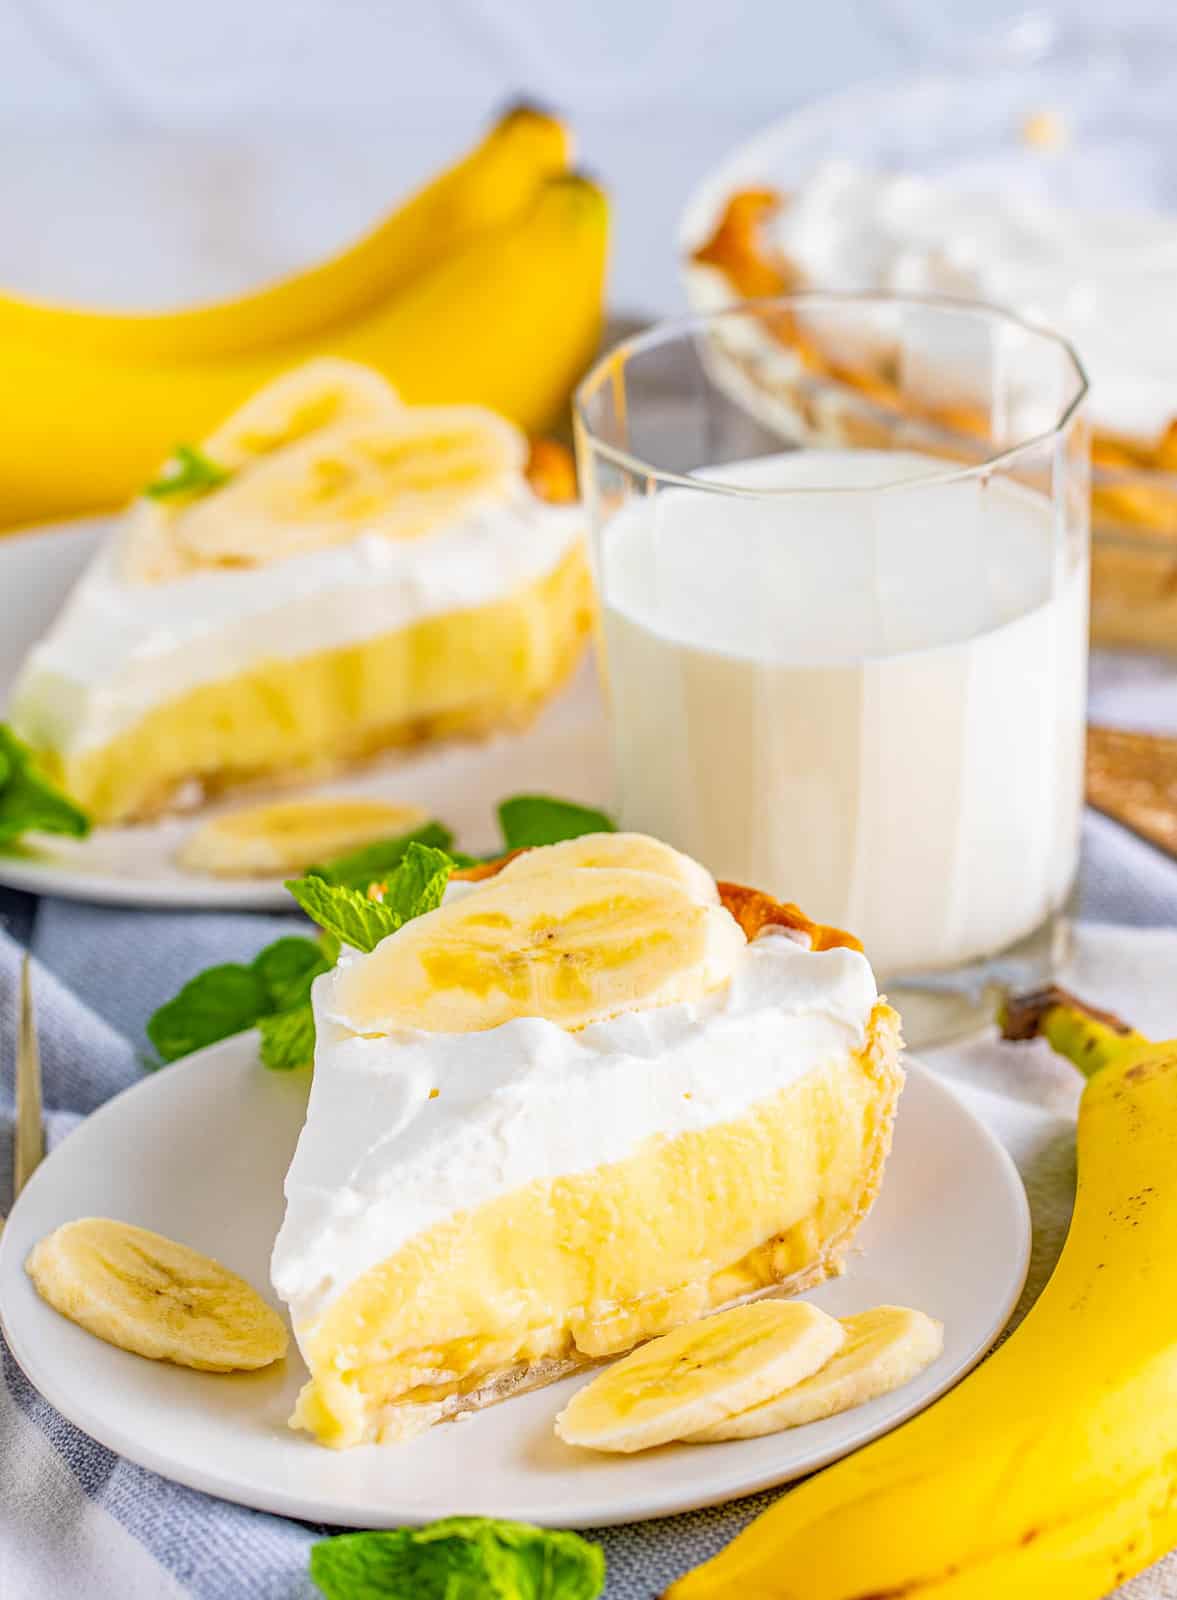 Two slices of Banana Cream Pie on white plates with milk in background.